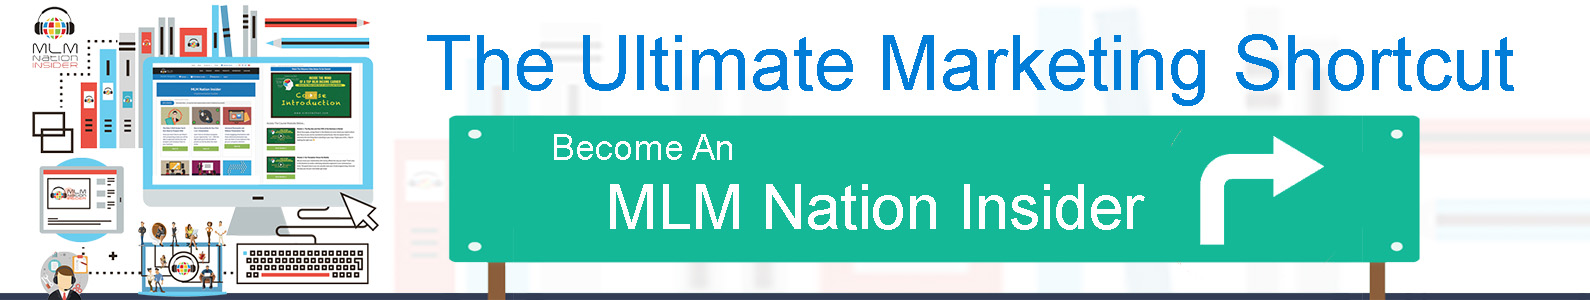 Become an MLM Nation Insider today